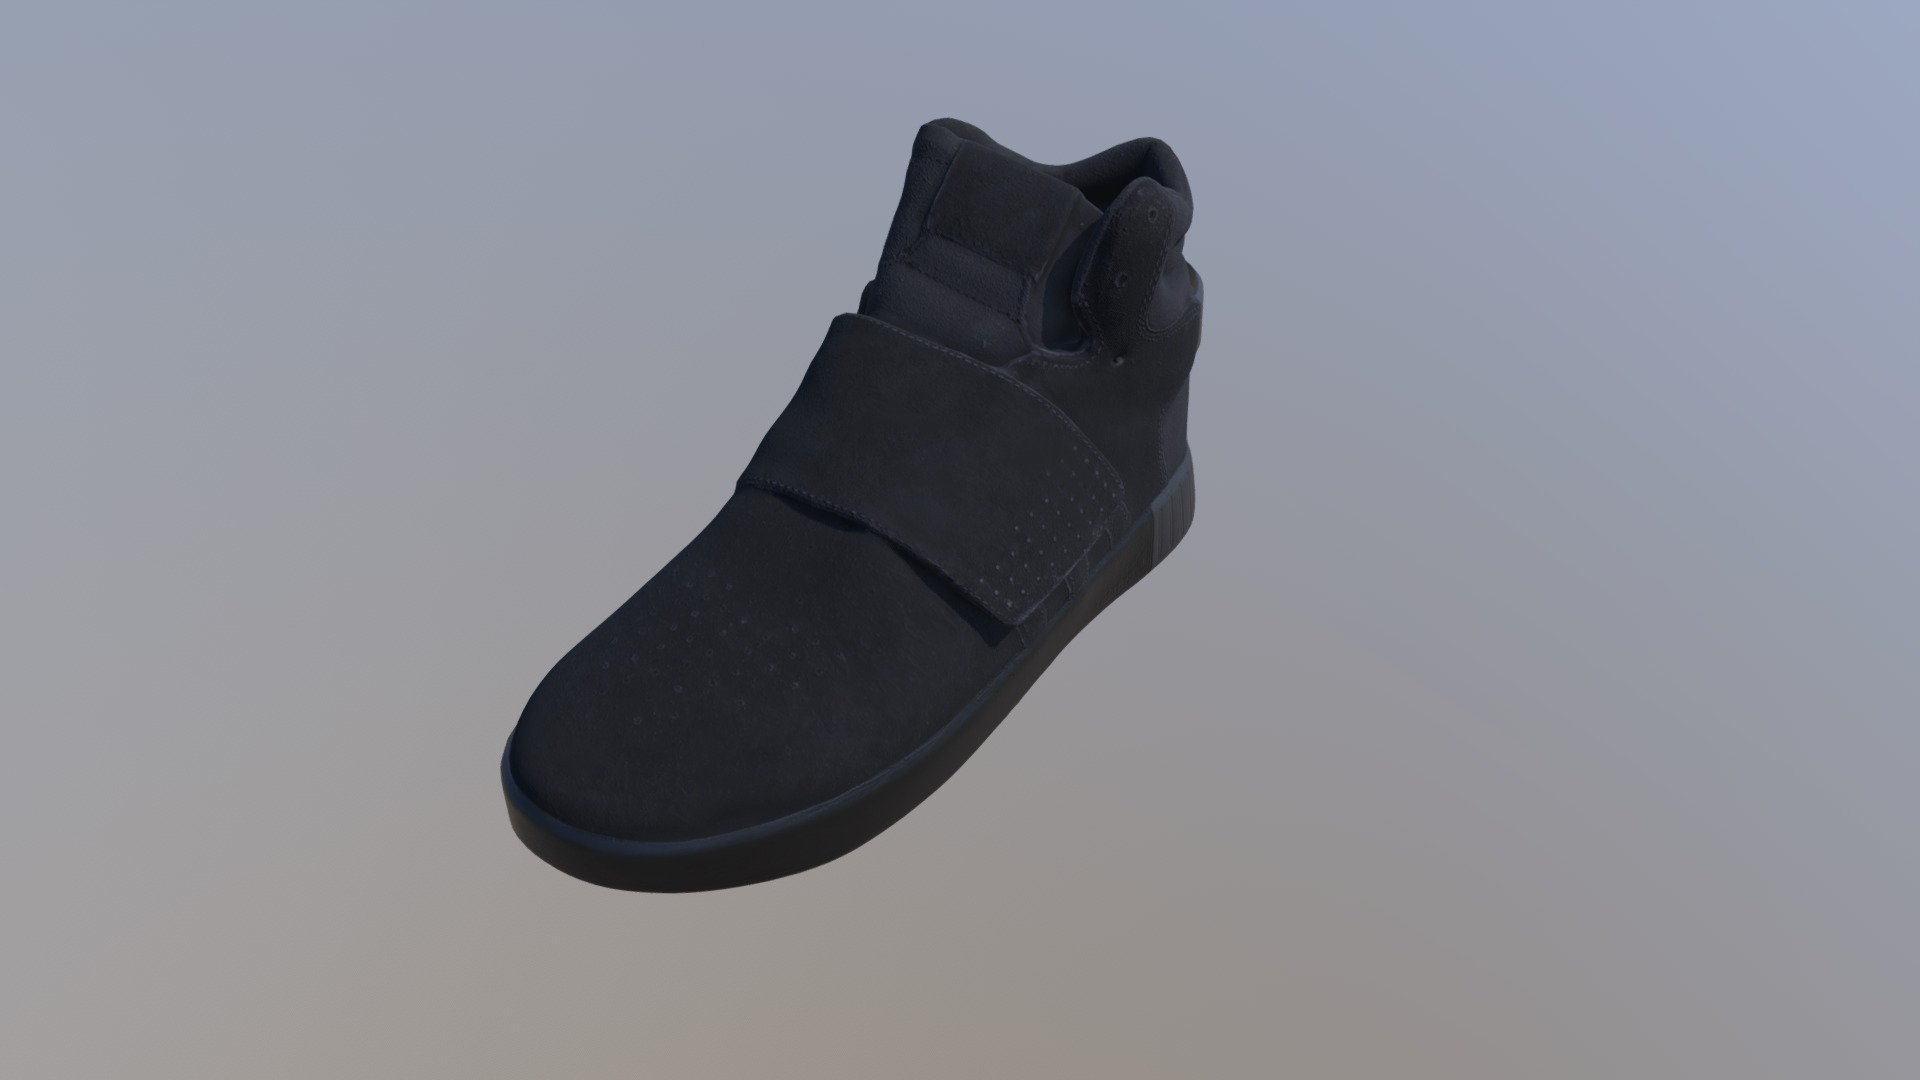 3D model Adidas Shoes 2018 - This is a 3D model of the Adidas Shoes 2018. The 3D model is about a black shoe on a white background.